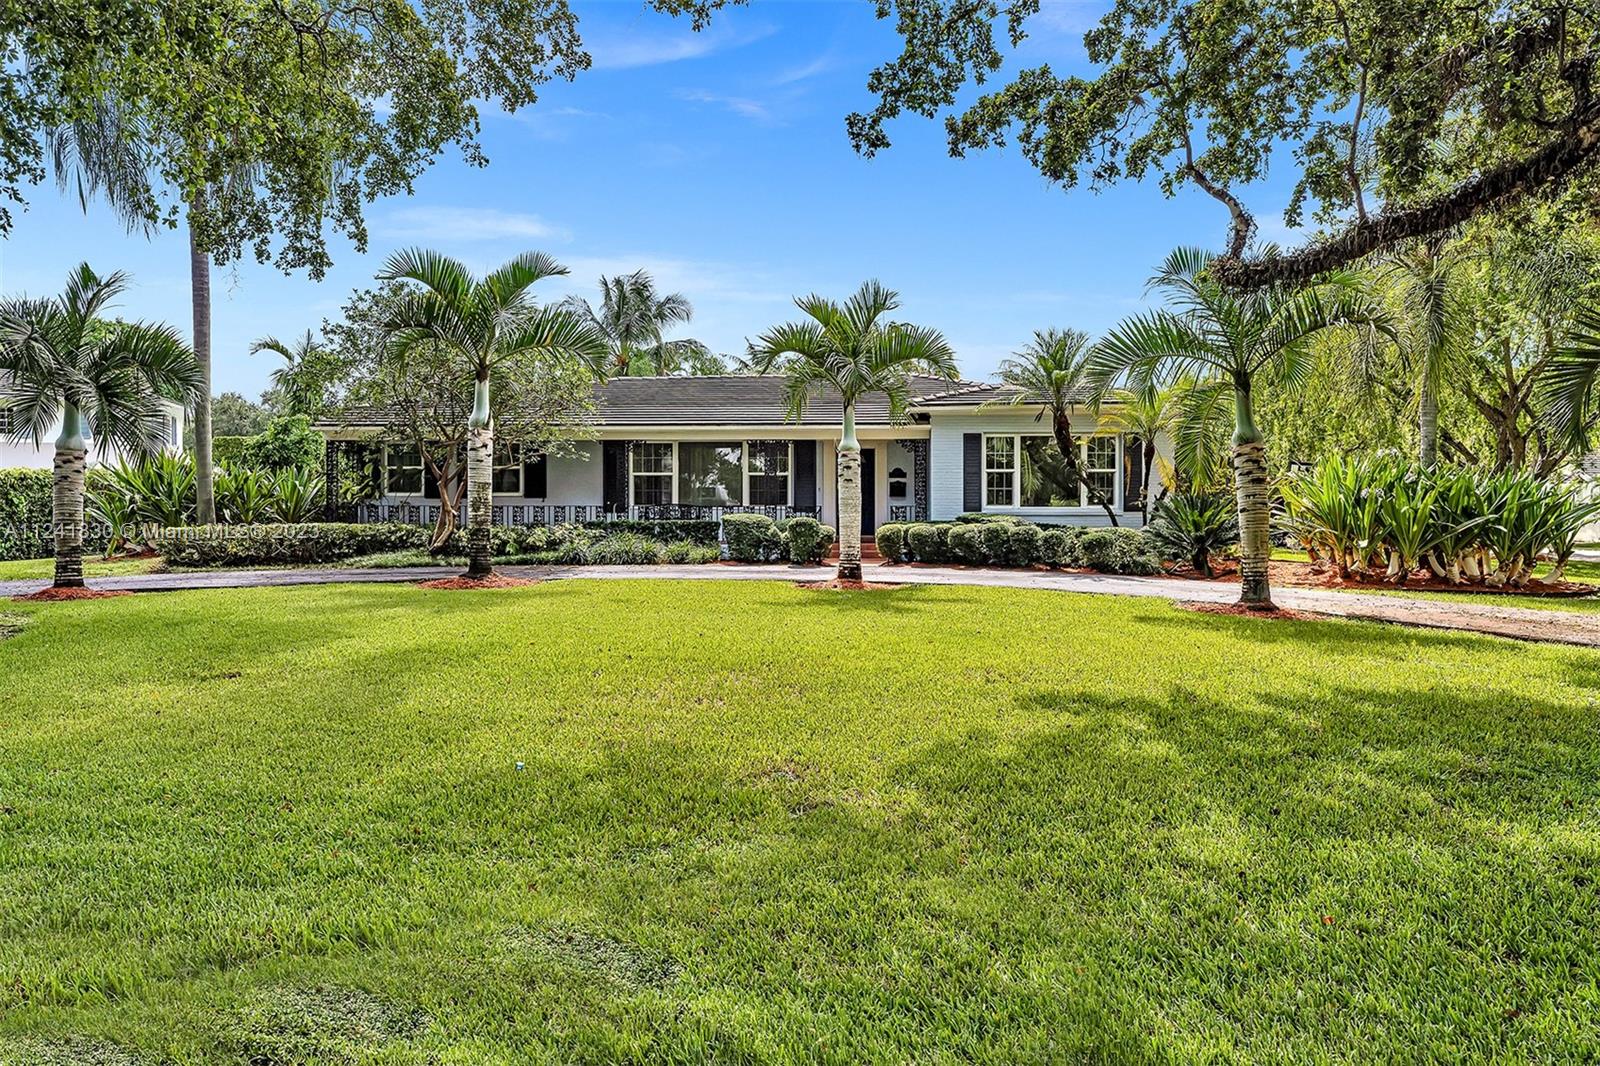 BROKERS OPEN WEDNESDAY 2/1 12pm-2:00pm. NEW PRICE. As Florida has continued to be the top destination for personal and business relocation, Coral Gables has cemented its place as the premier city for living & working in Miami. This exquisite single-family home is located on a large 16000+ Sq. Ft. corner lot. right on the beautiful tree-lined Alhambra Circle. It features 4 bedrooms, 3 bathrooms, remodeled kitchen with new appliances, florida room, family room and formal dining room, it showcases the detail of original hard wood floors throughout, cedar closets, impact windows, and plenty of storage. The living areas are spacious with a practical lay out, perfect for entertaining. Pool area and backyard with plenty of greenery. Two car garage and extra parking on the side of the house.